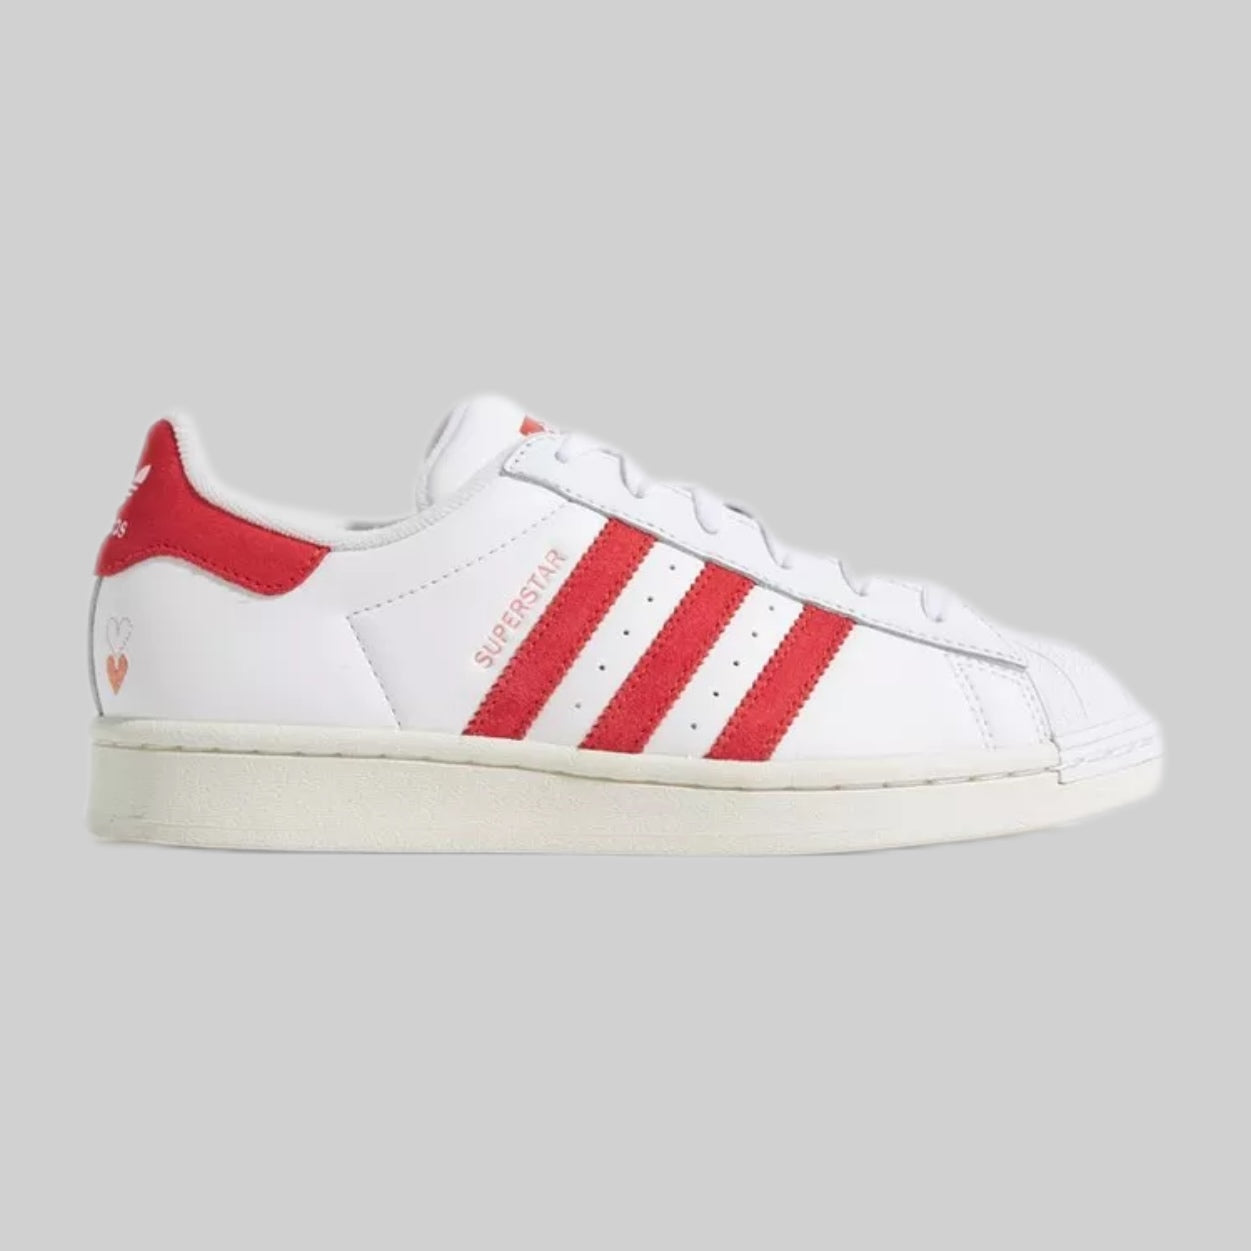 ADIDAS ORIGINALS sneakers, women, white and red, frontside